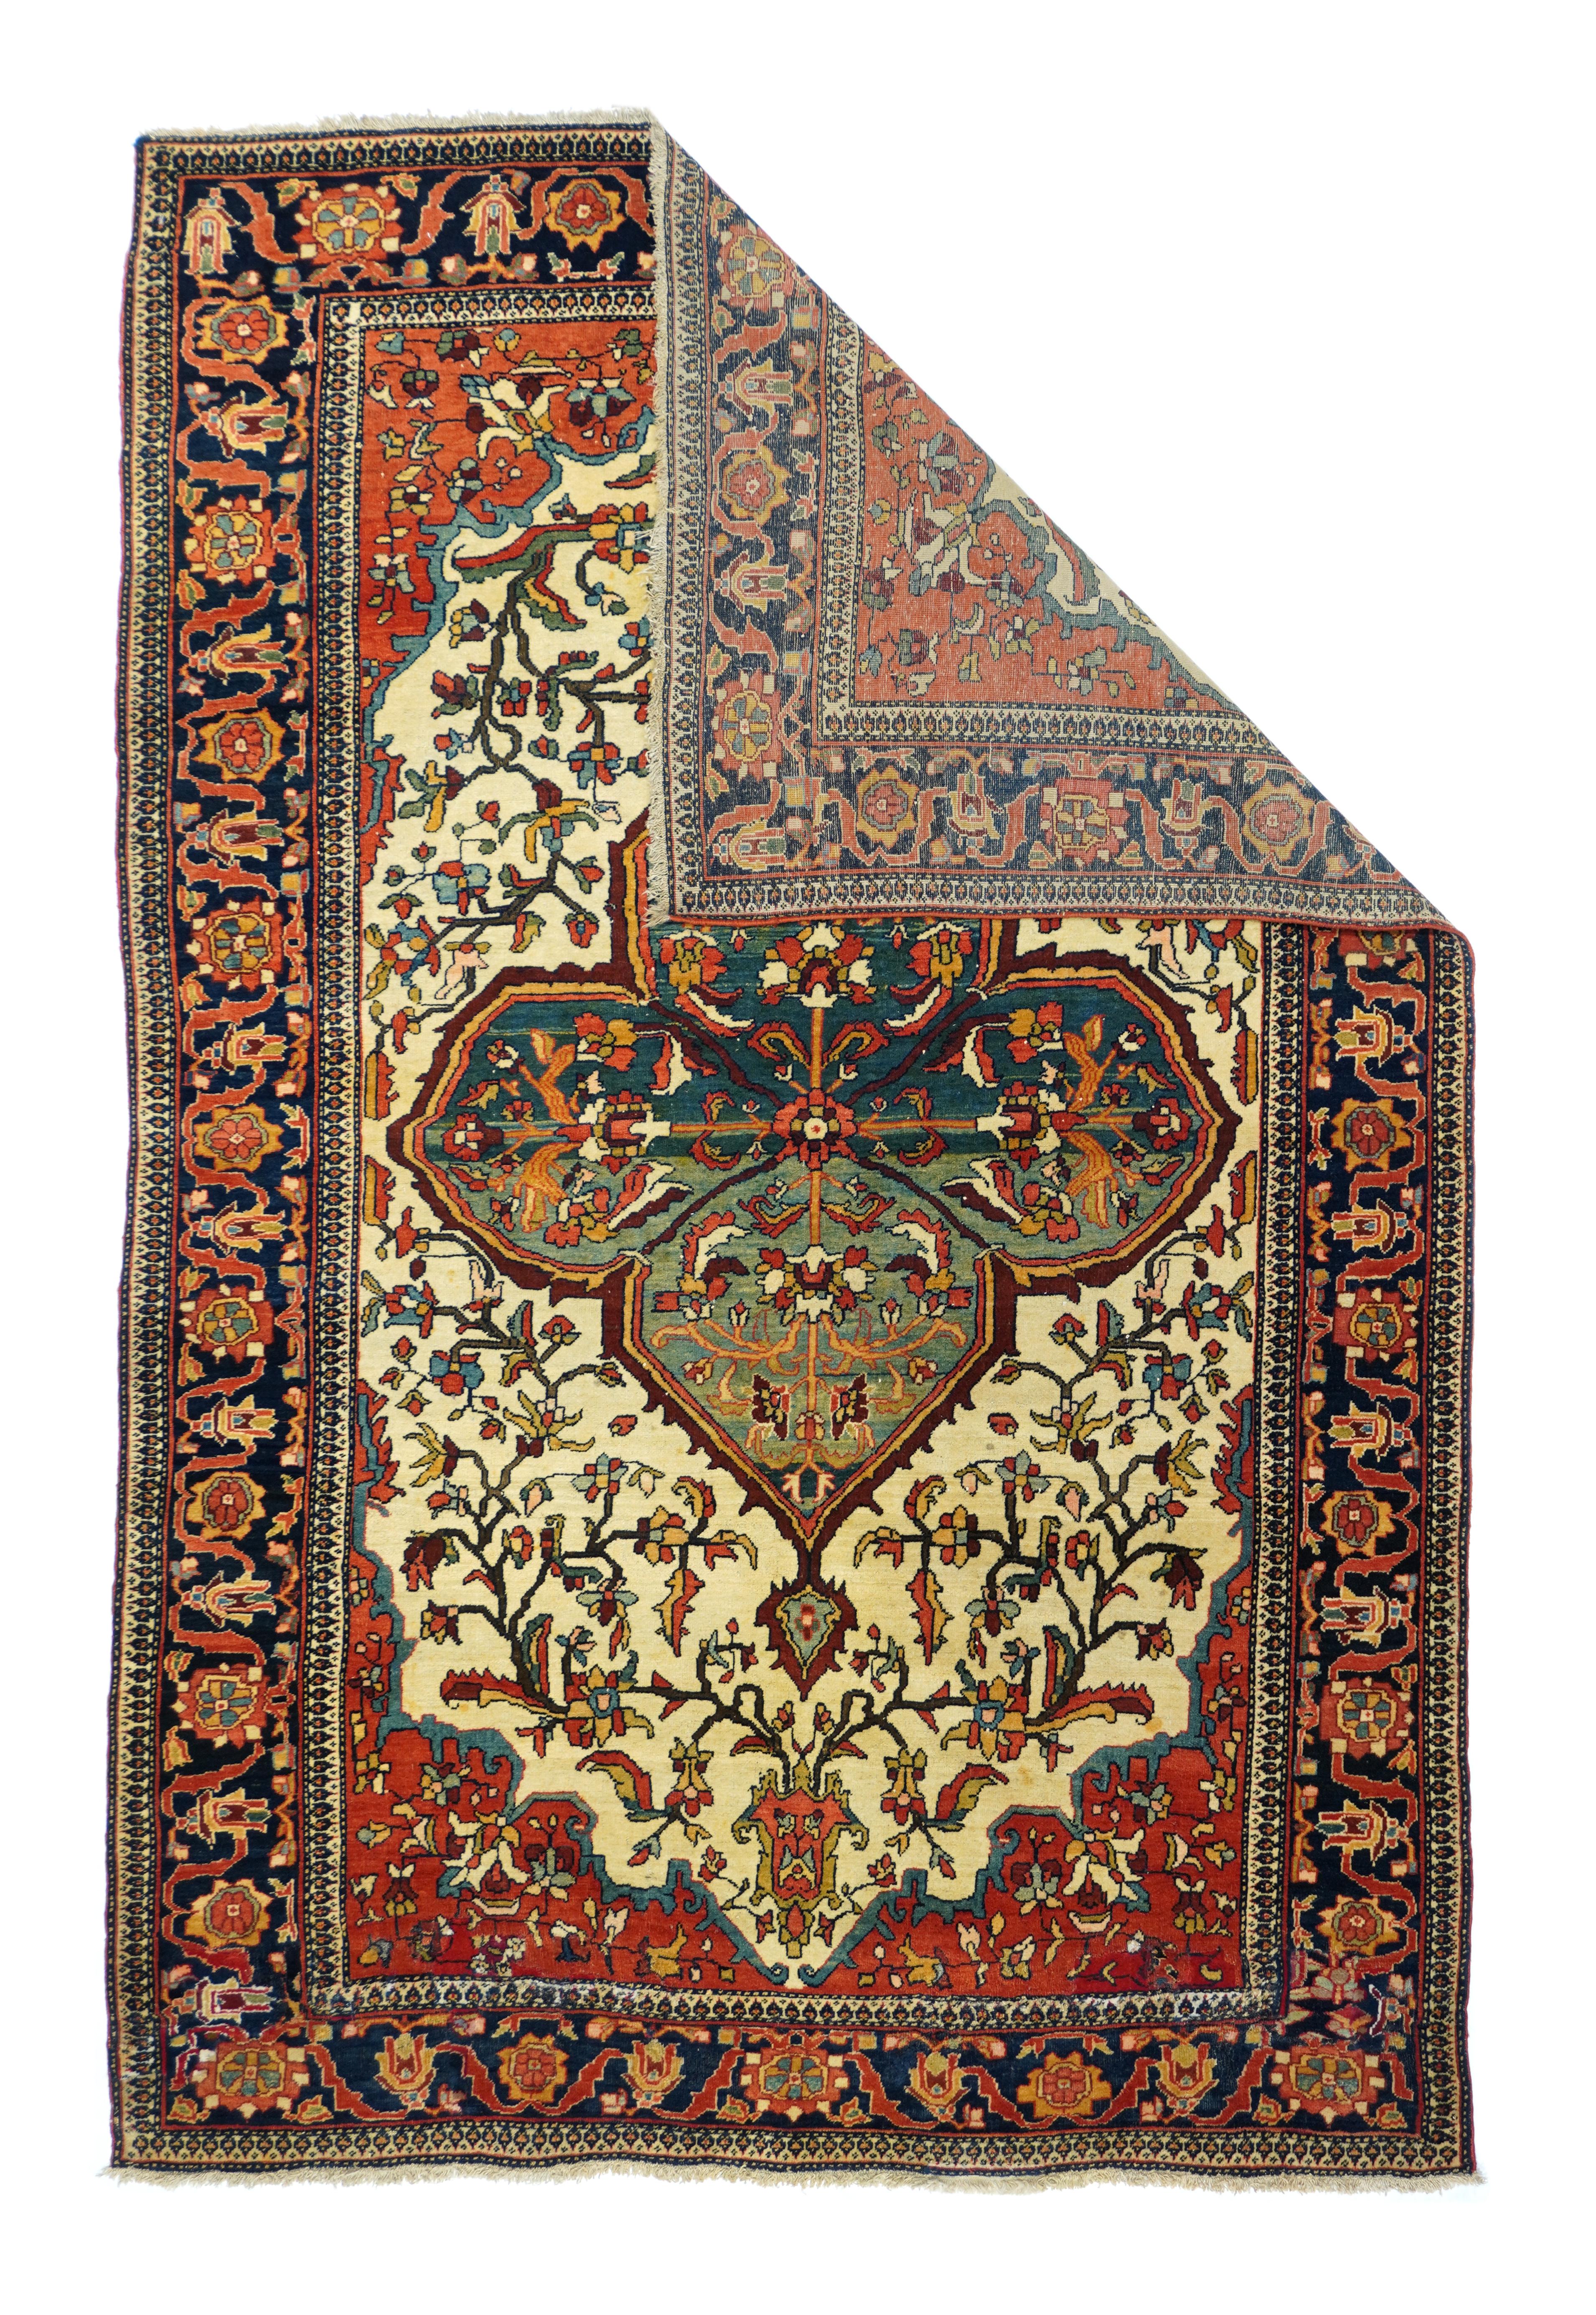 This attractive west Persian, well-woven, scatter shows a particularly bold green and blue abrashed quatrefoil medallion, against the old ivory field with verdant vines growing from ragged end palmettes. Rust corners keyed into the field with